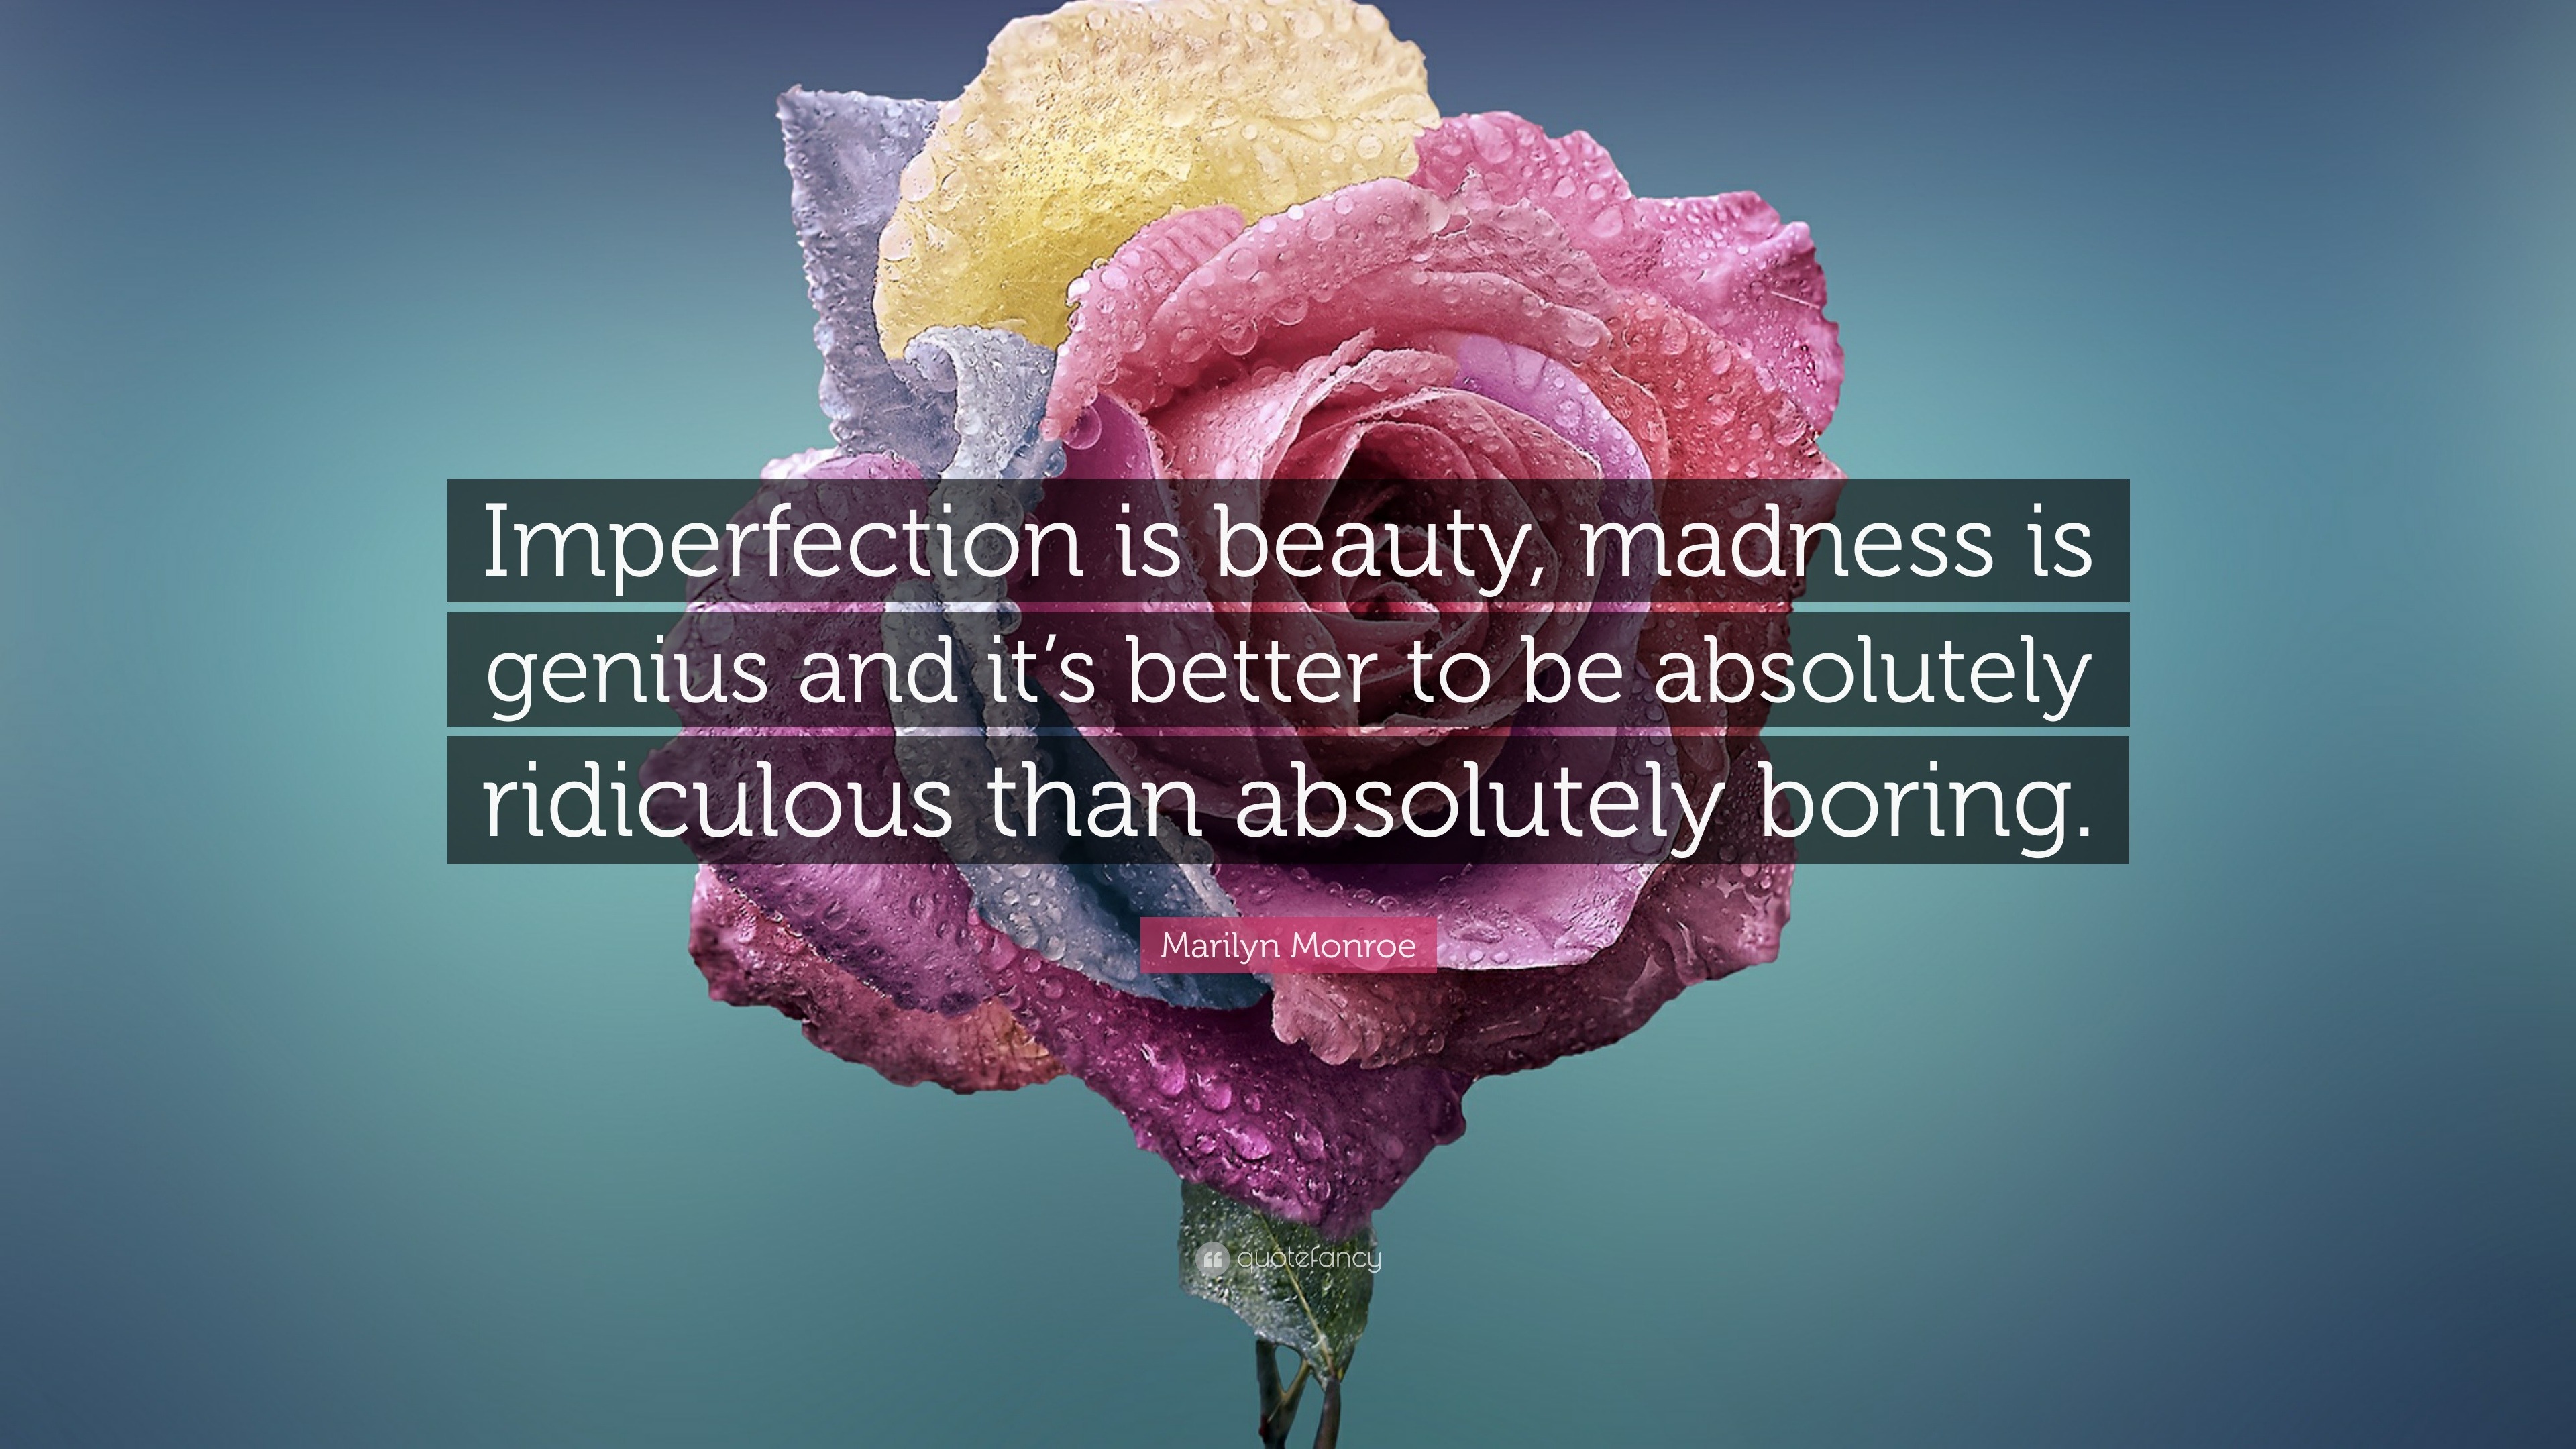 Marilyn Monroe Quote: “Imperfection is beauty, madness is genius and it